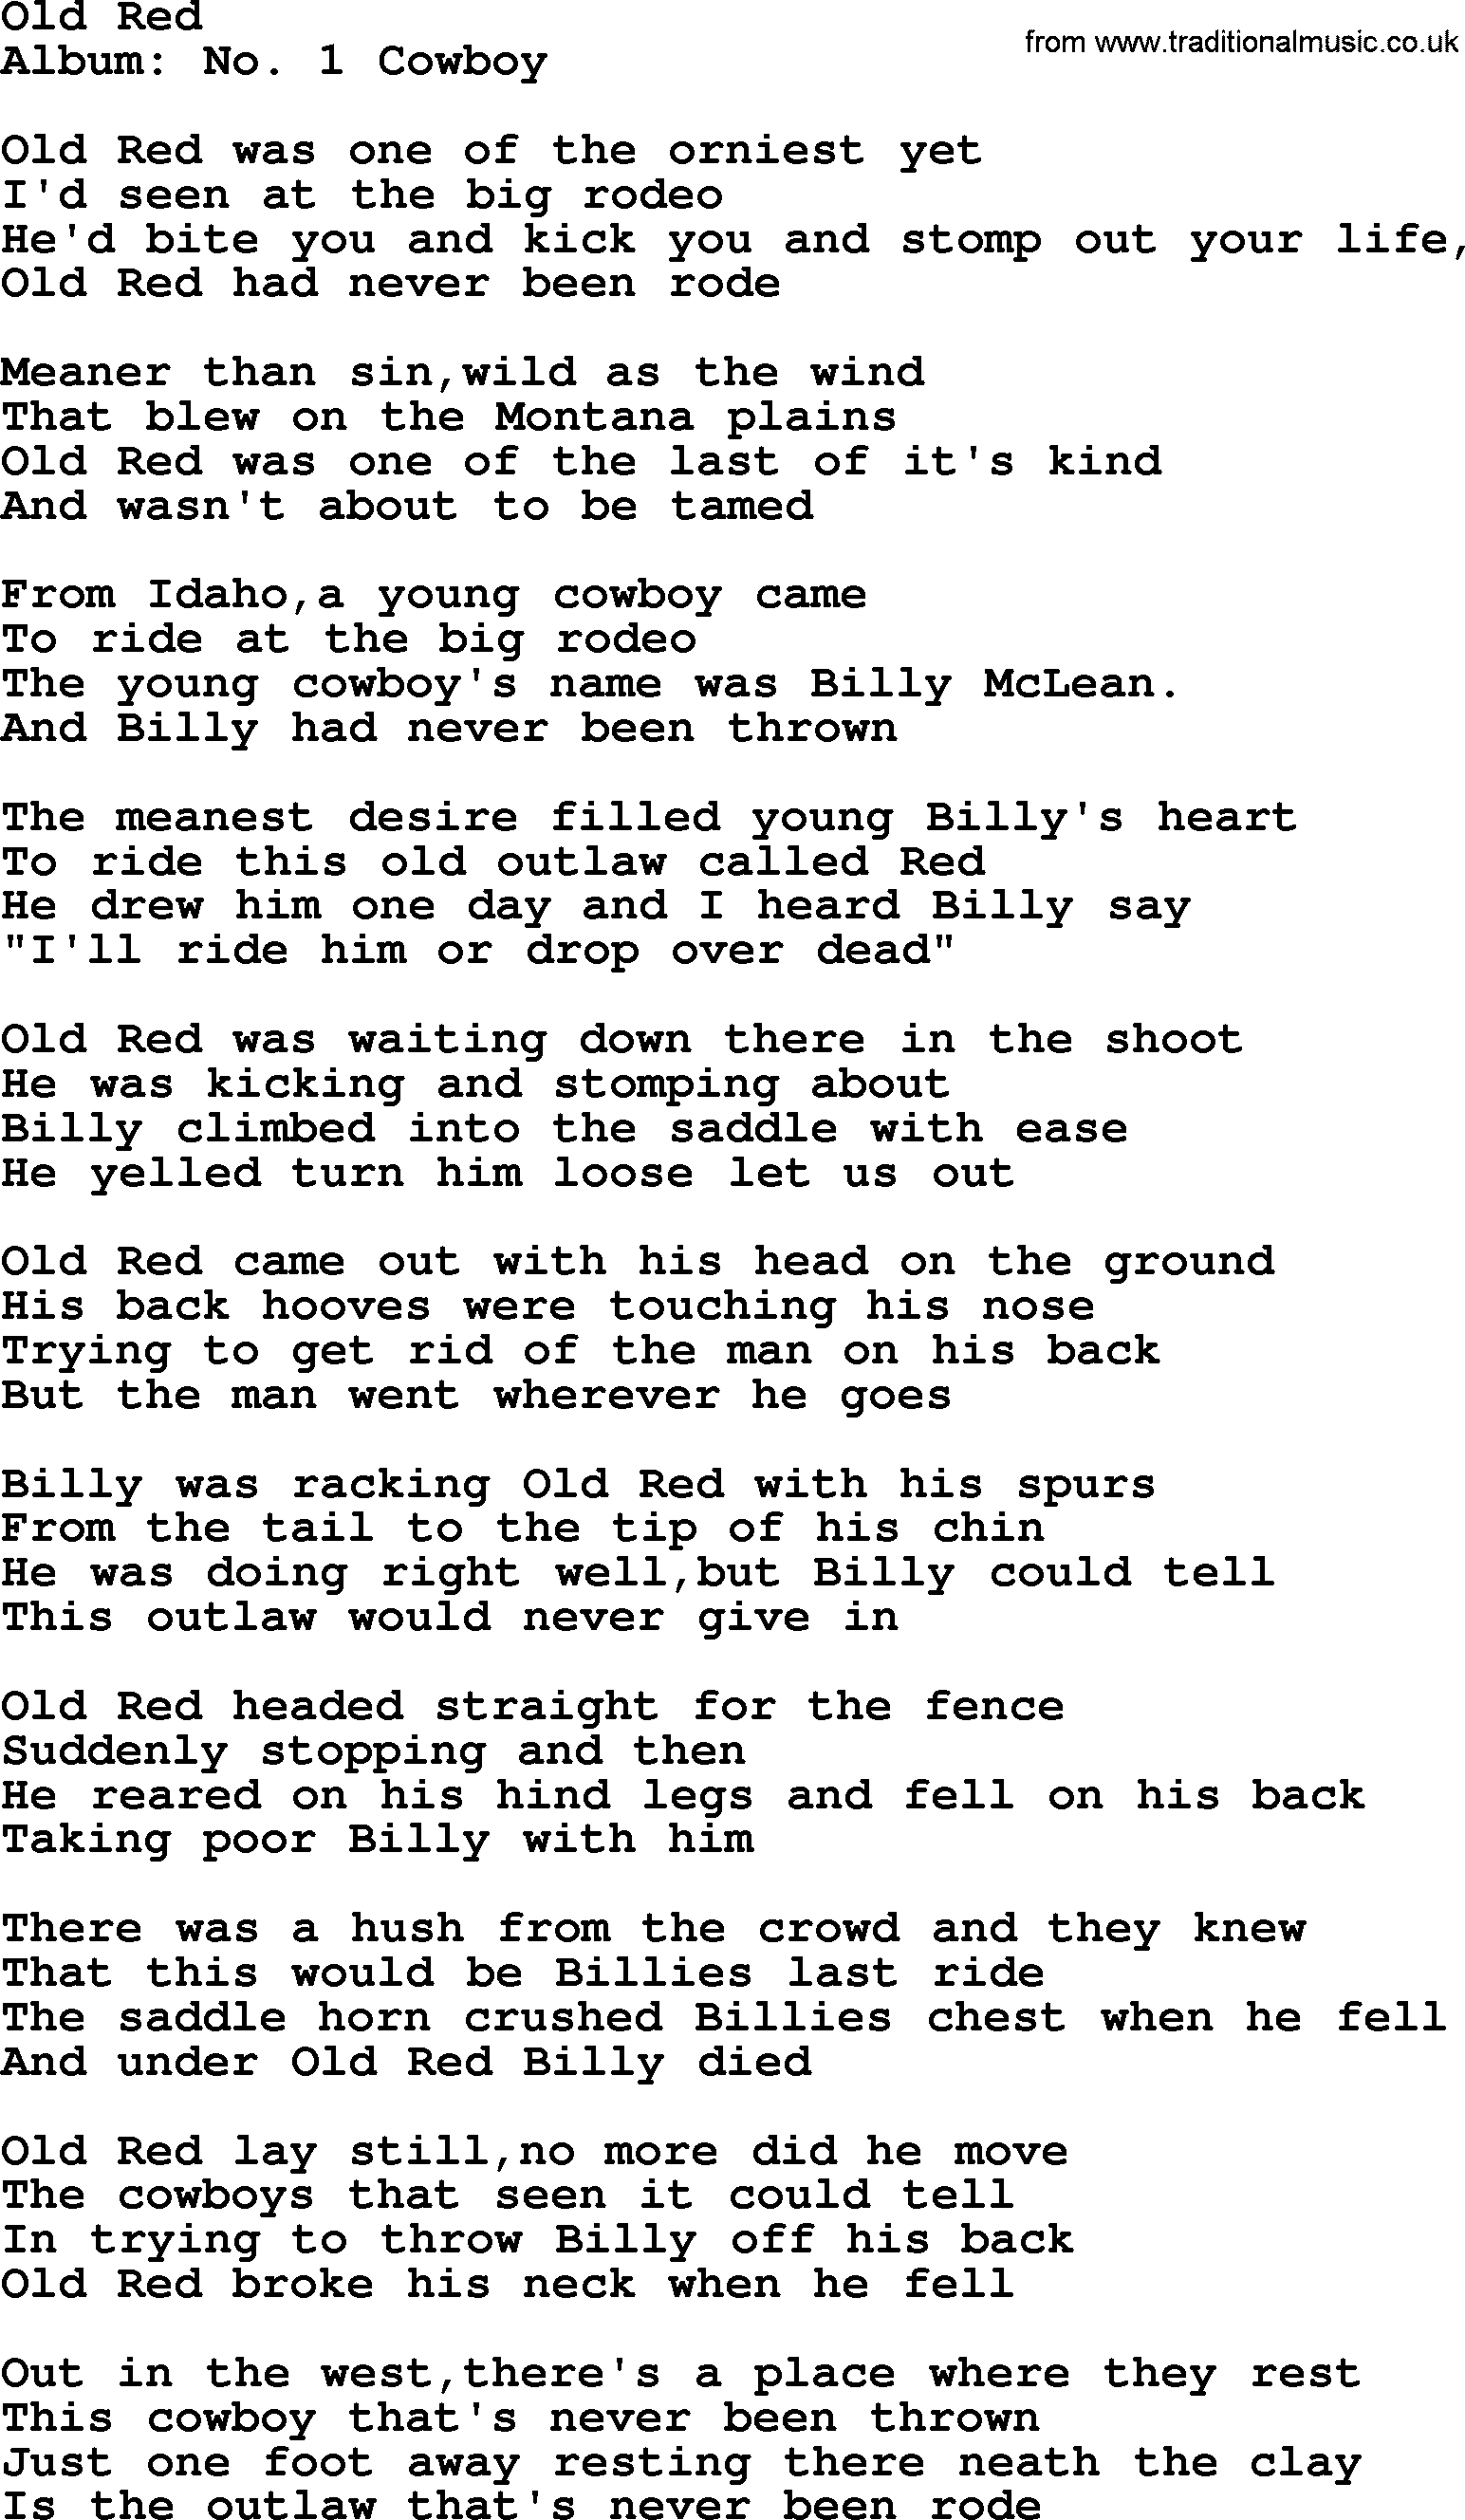 Marty Robbins song: Old Red, lyrics